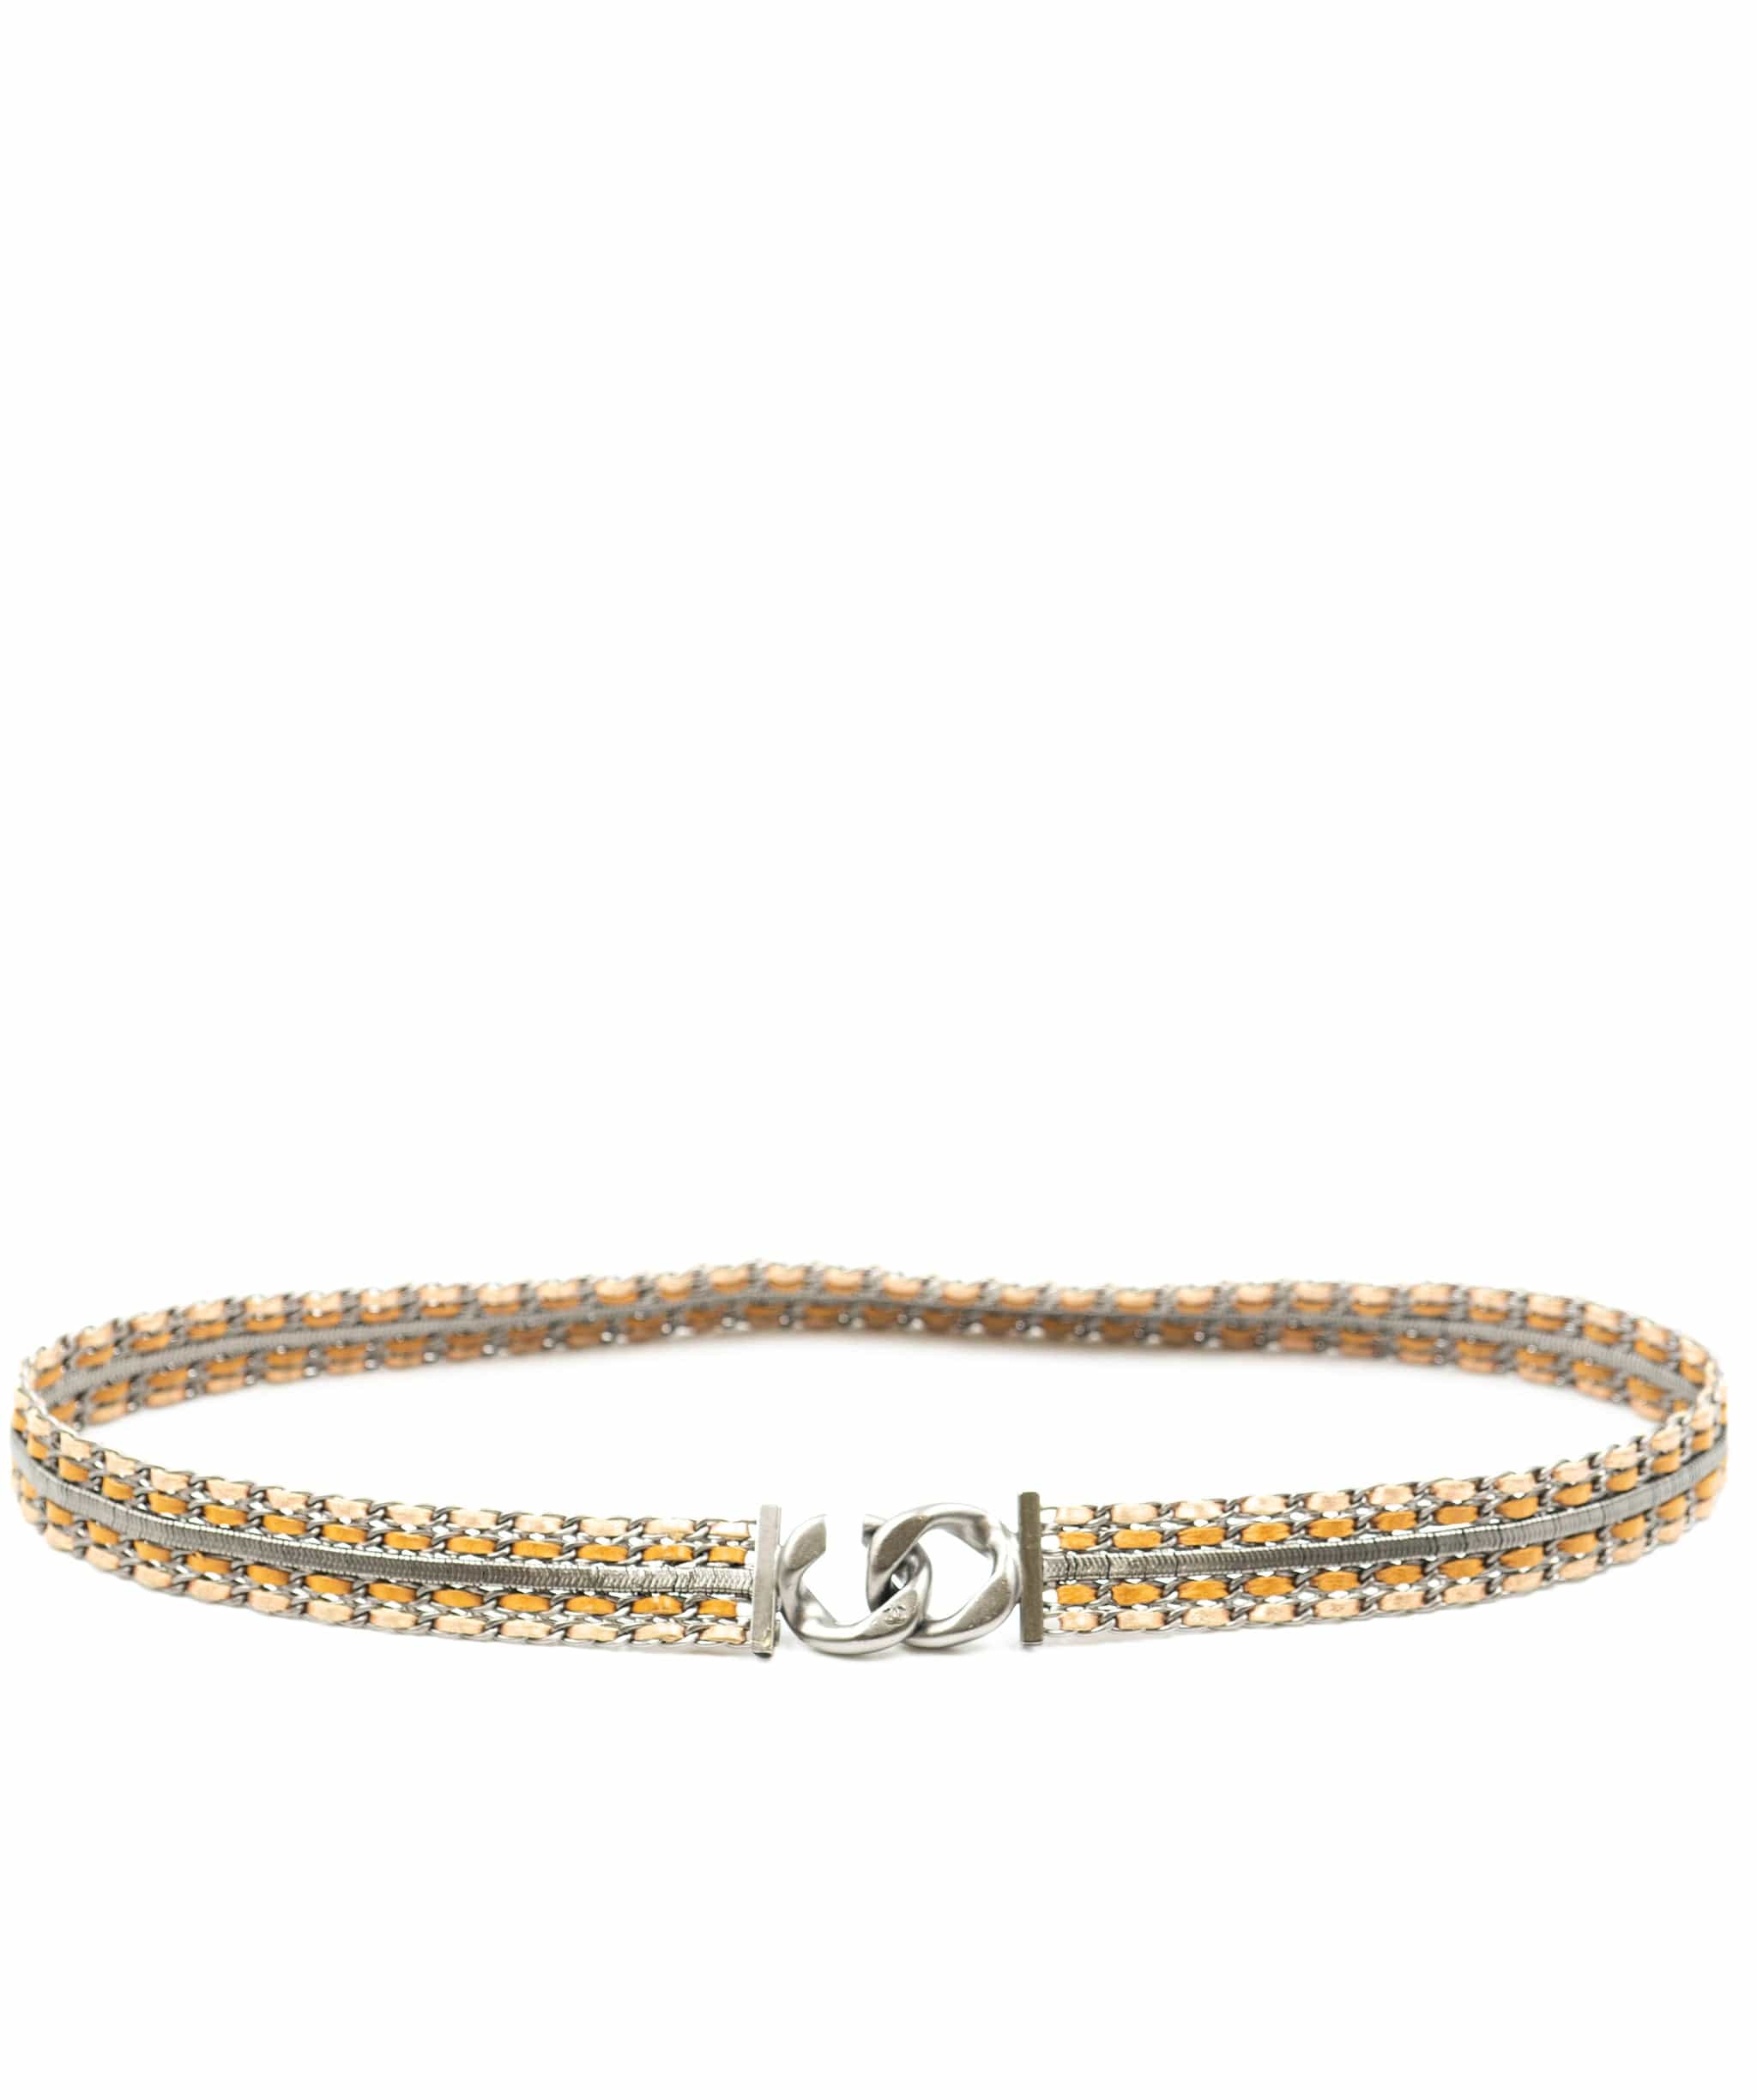 Chanel Chanel Metal Belt Silver Interwoven Leather - AWL1975